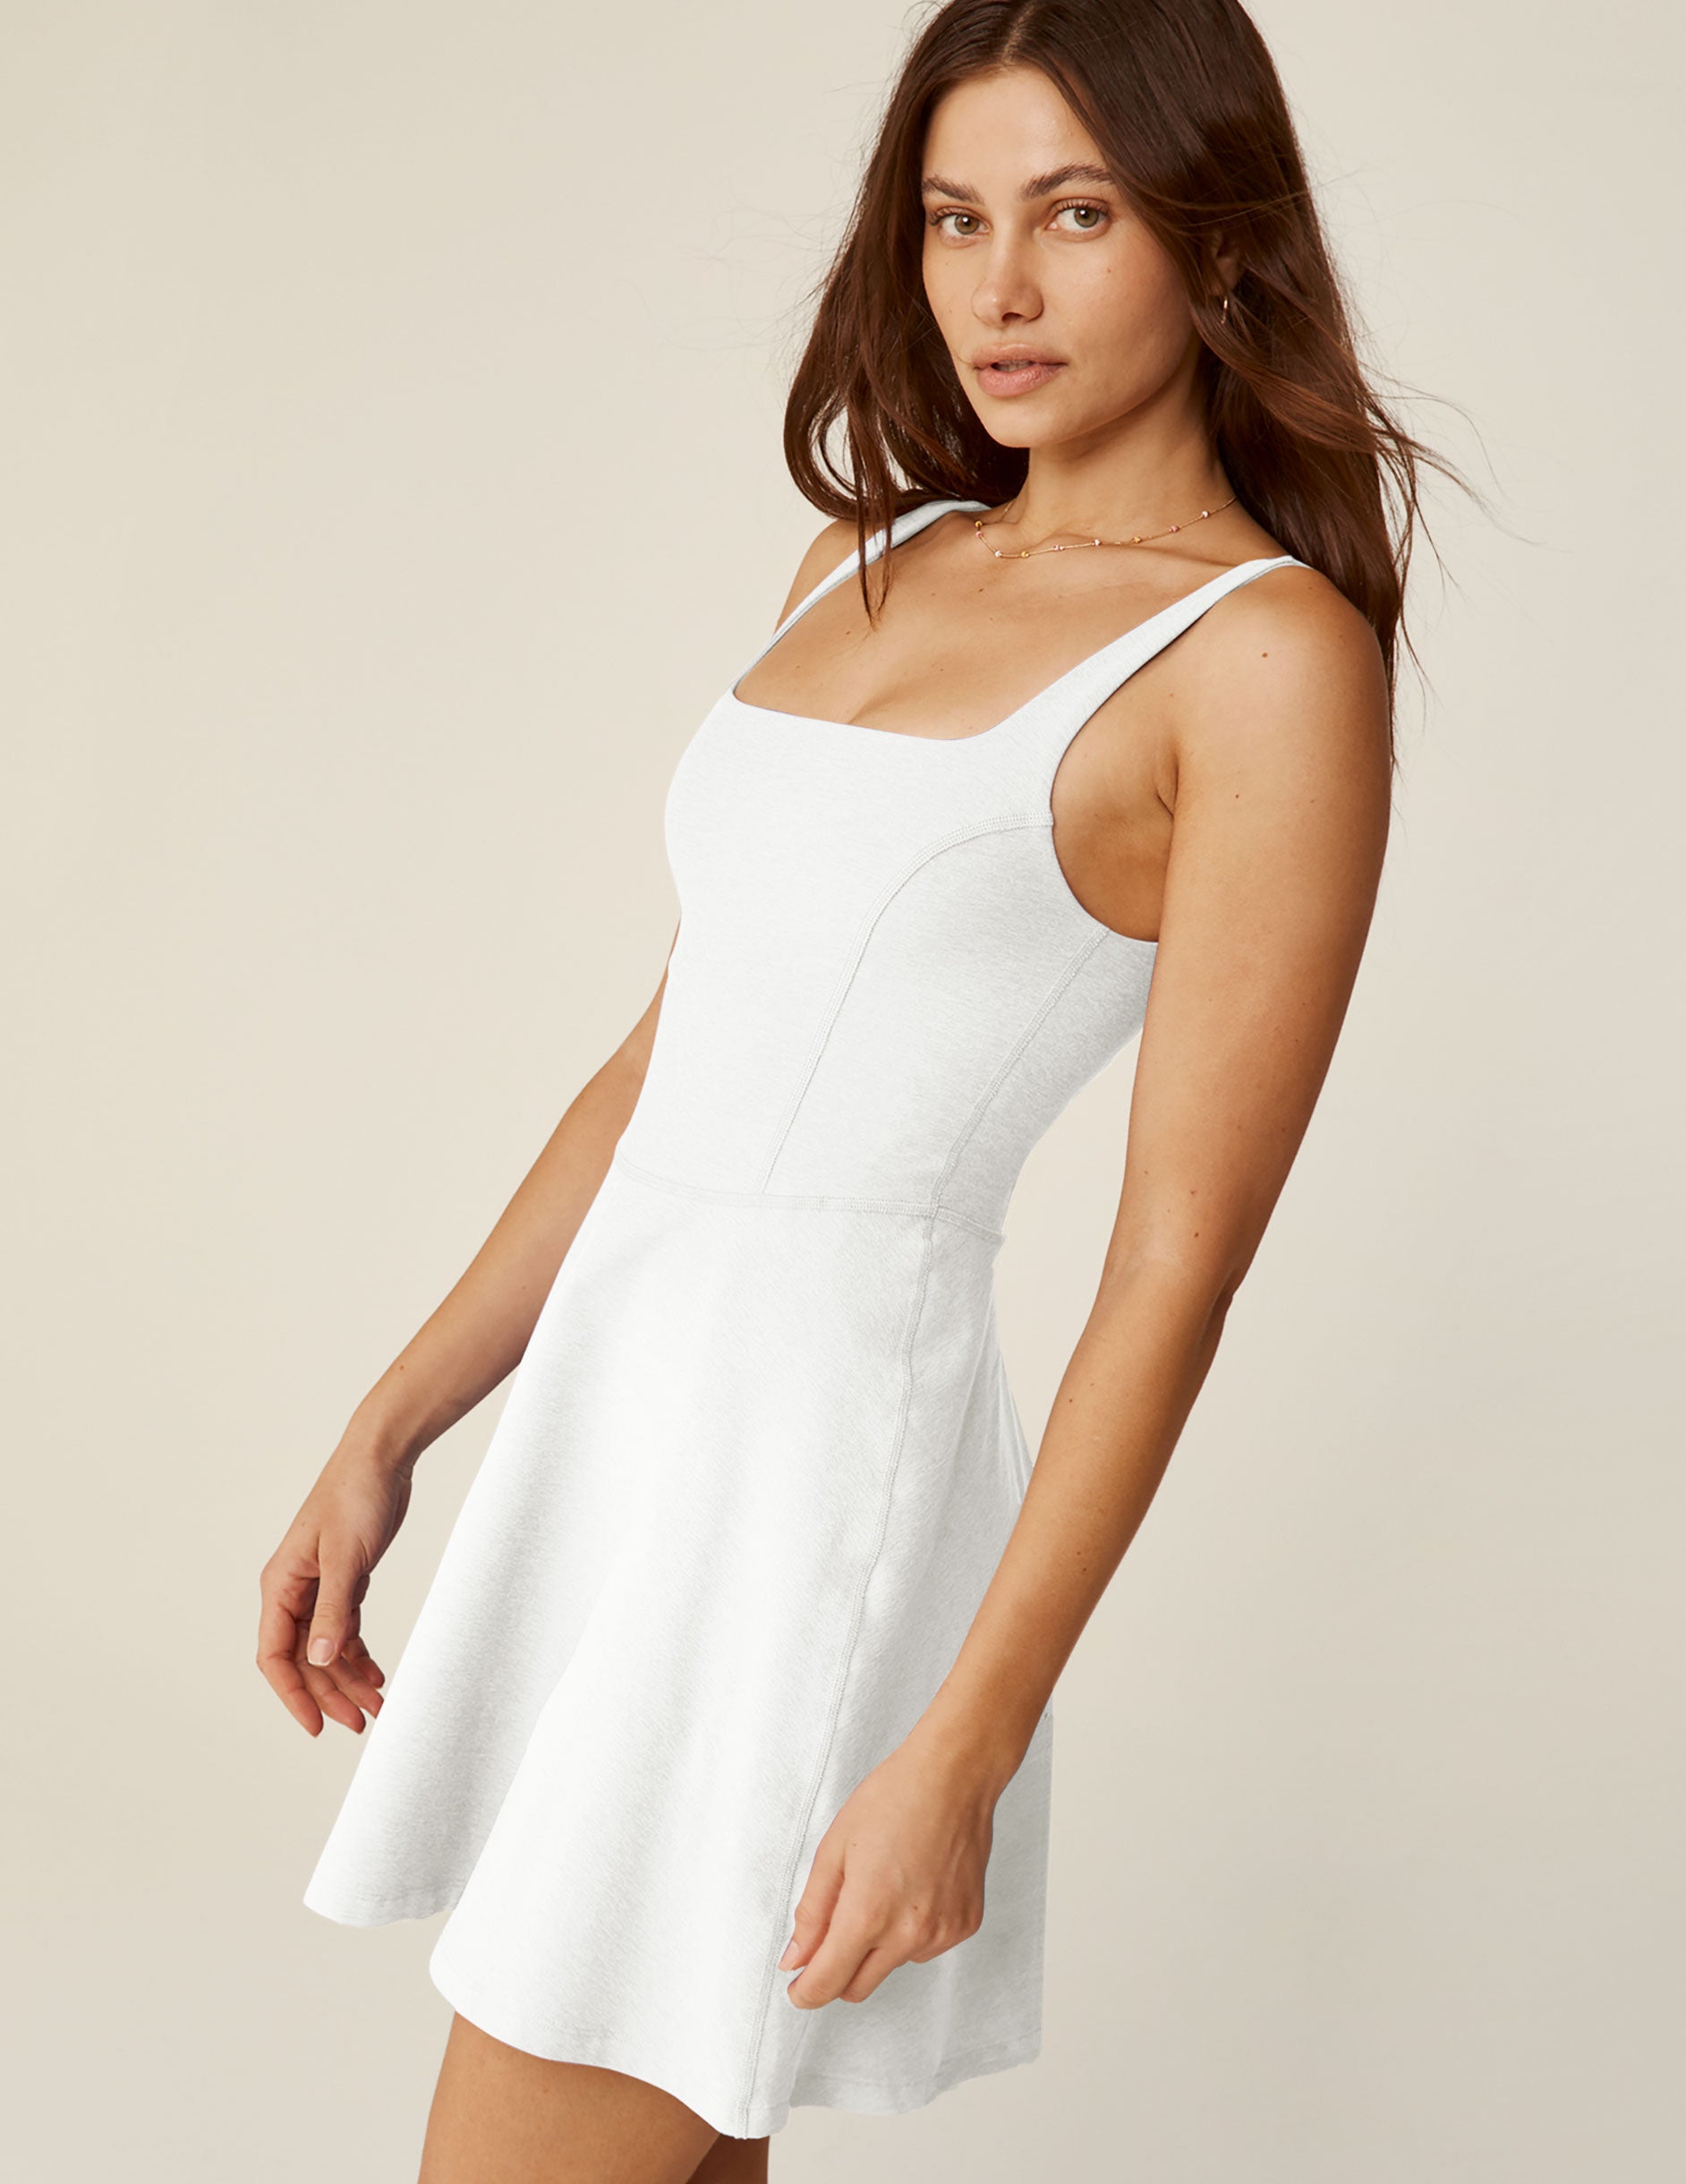 white spacedye dress with a squared neckline and built-in shorts with pockets. 